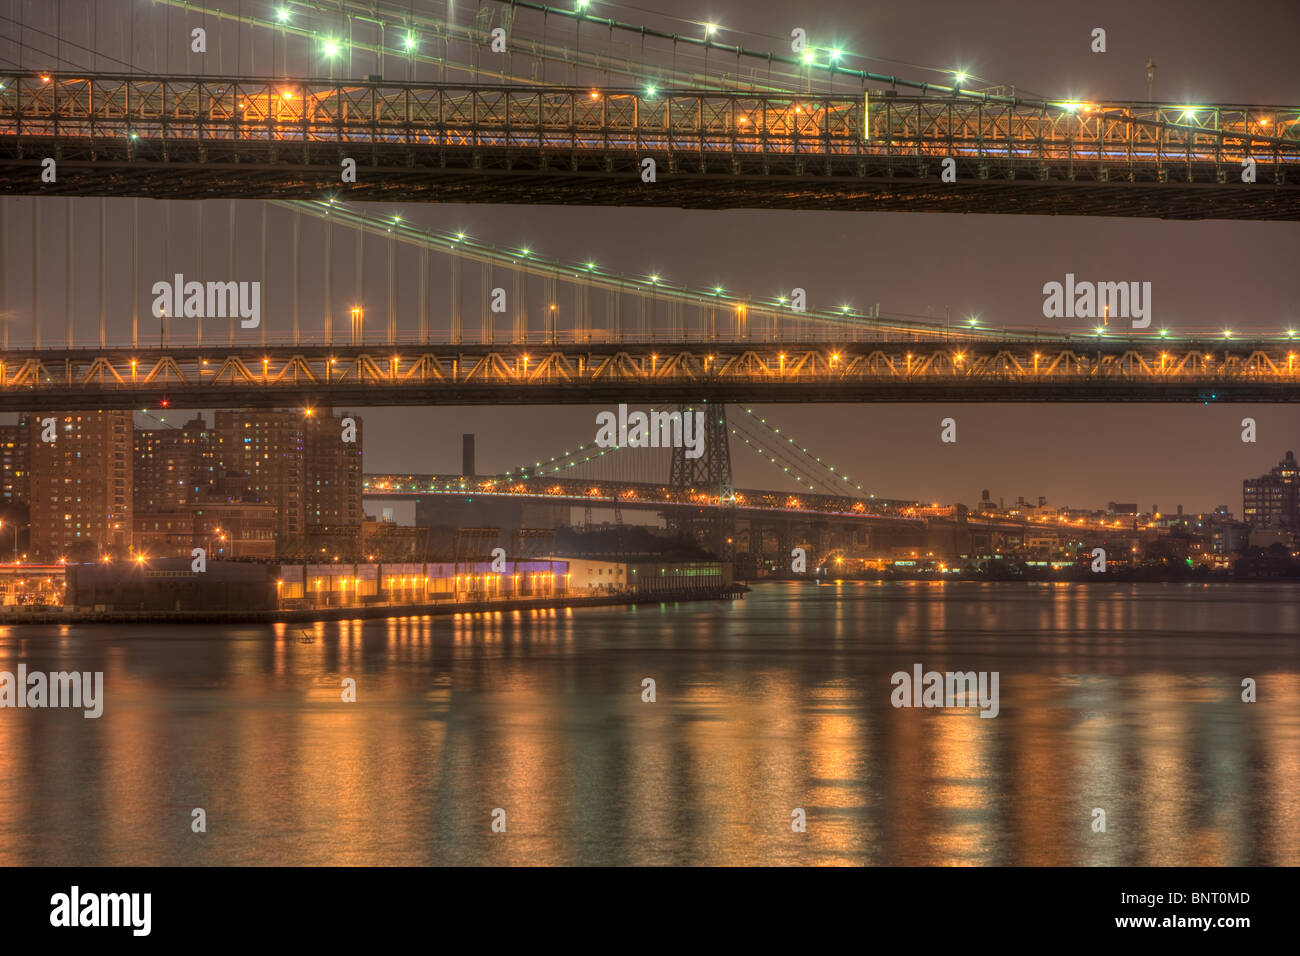 The Brooklyn, Manhattan, and Williamsburg bridges on the East River at night in New York City. Stock Photo